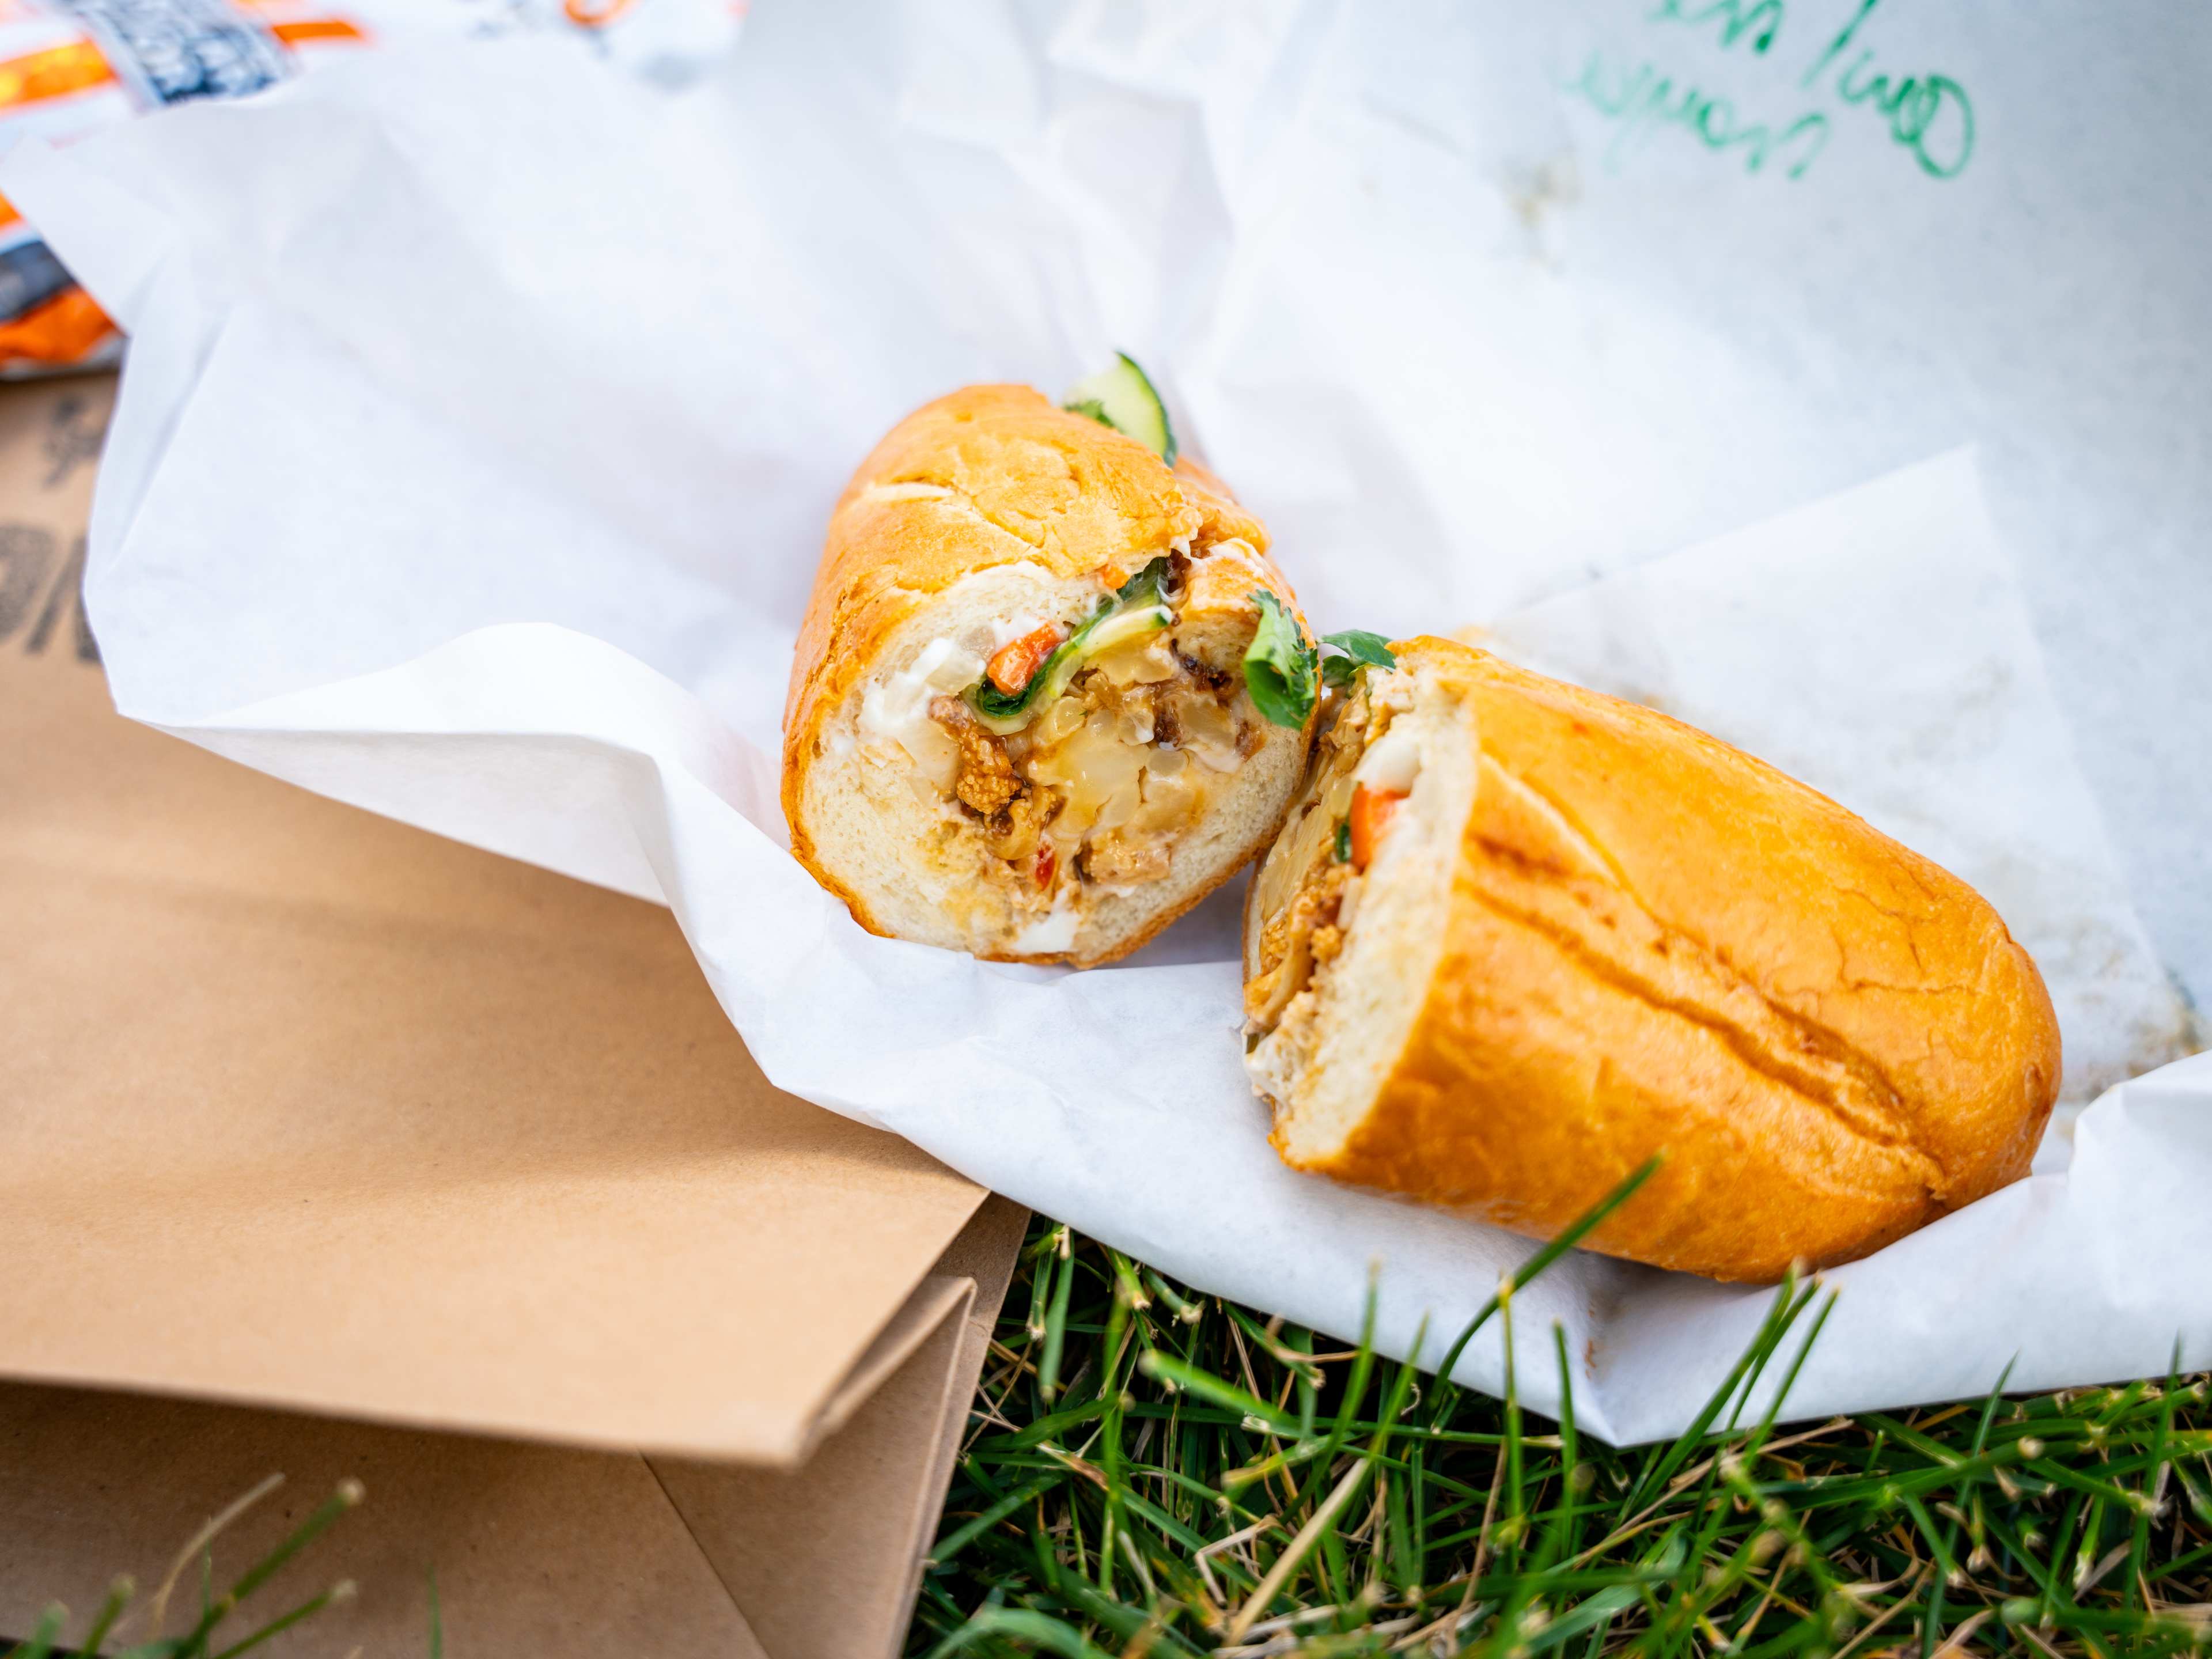 banh mi cut in half to show filling on grass